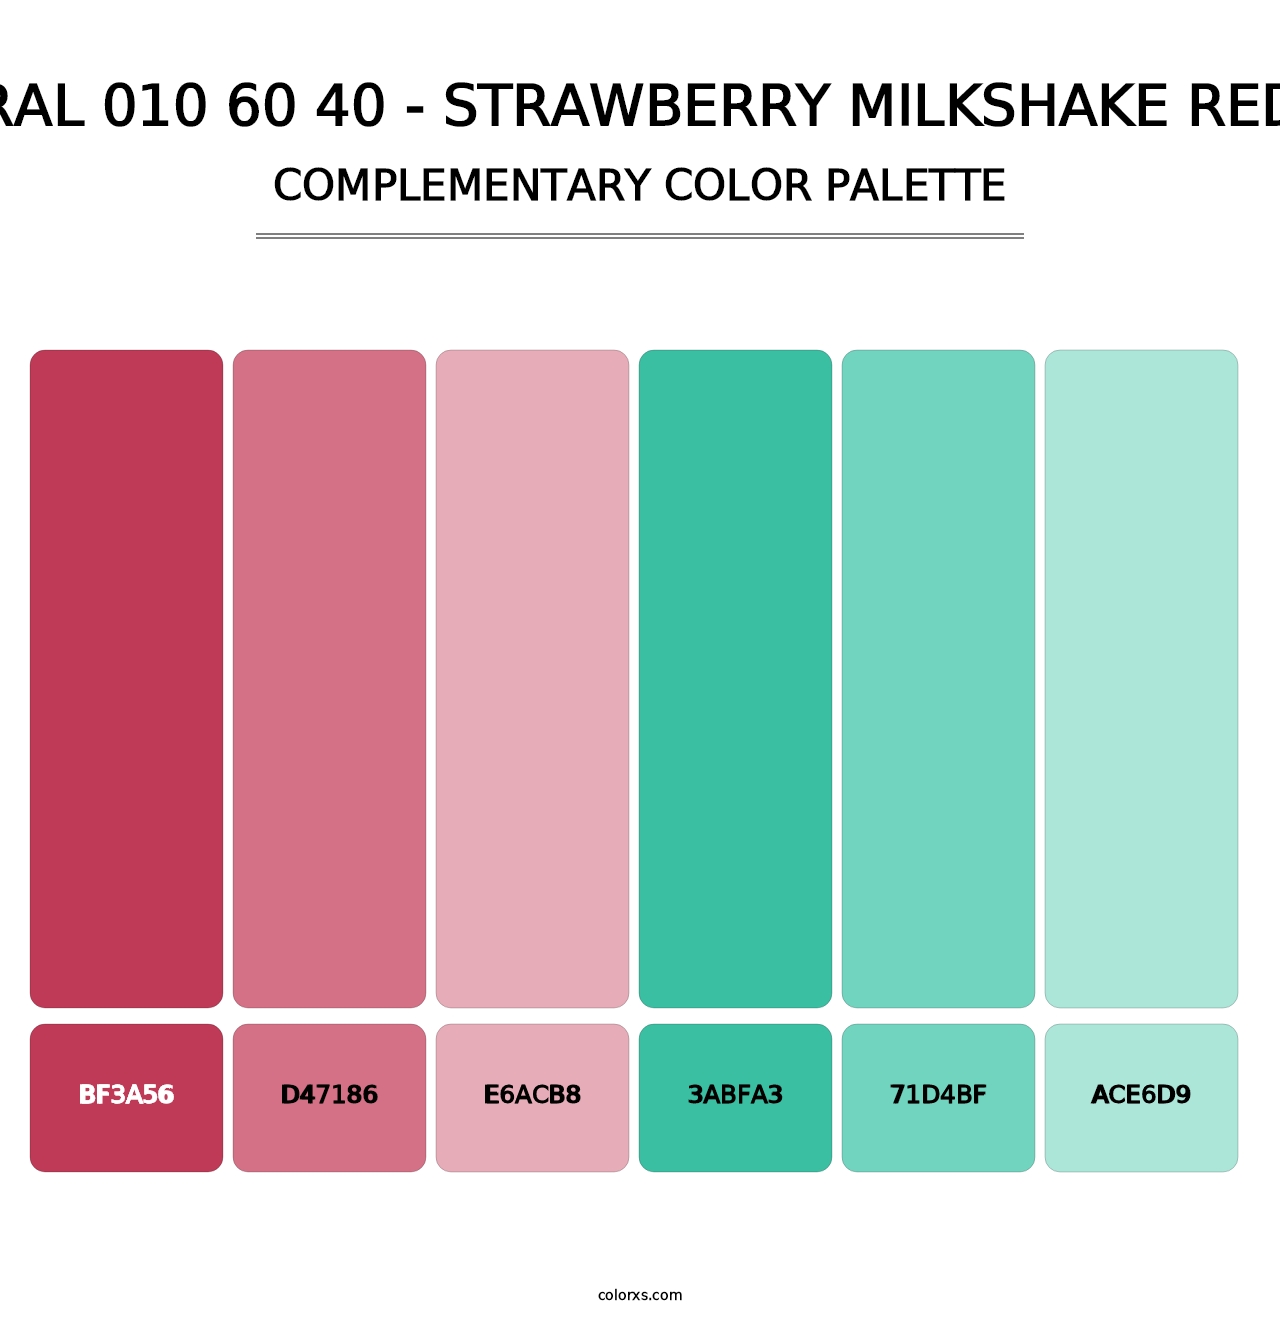 RAL 010 60 40 - Strawberry Milkshake Red - Complementary Color Palette